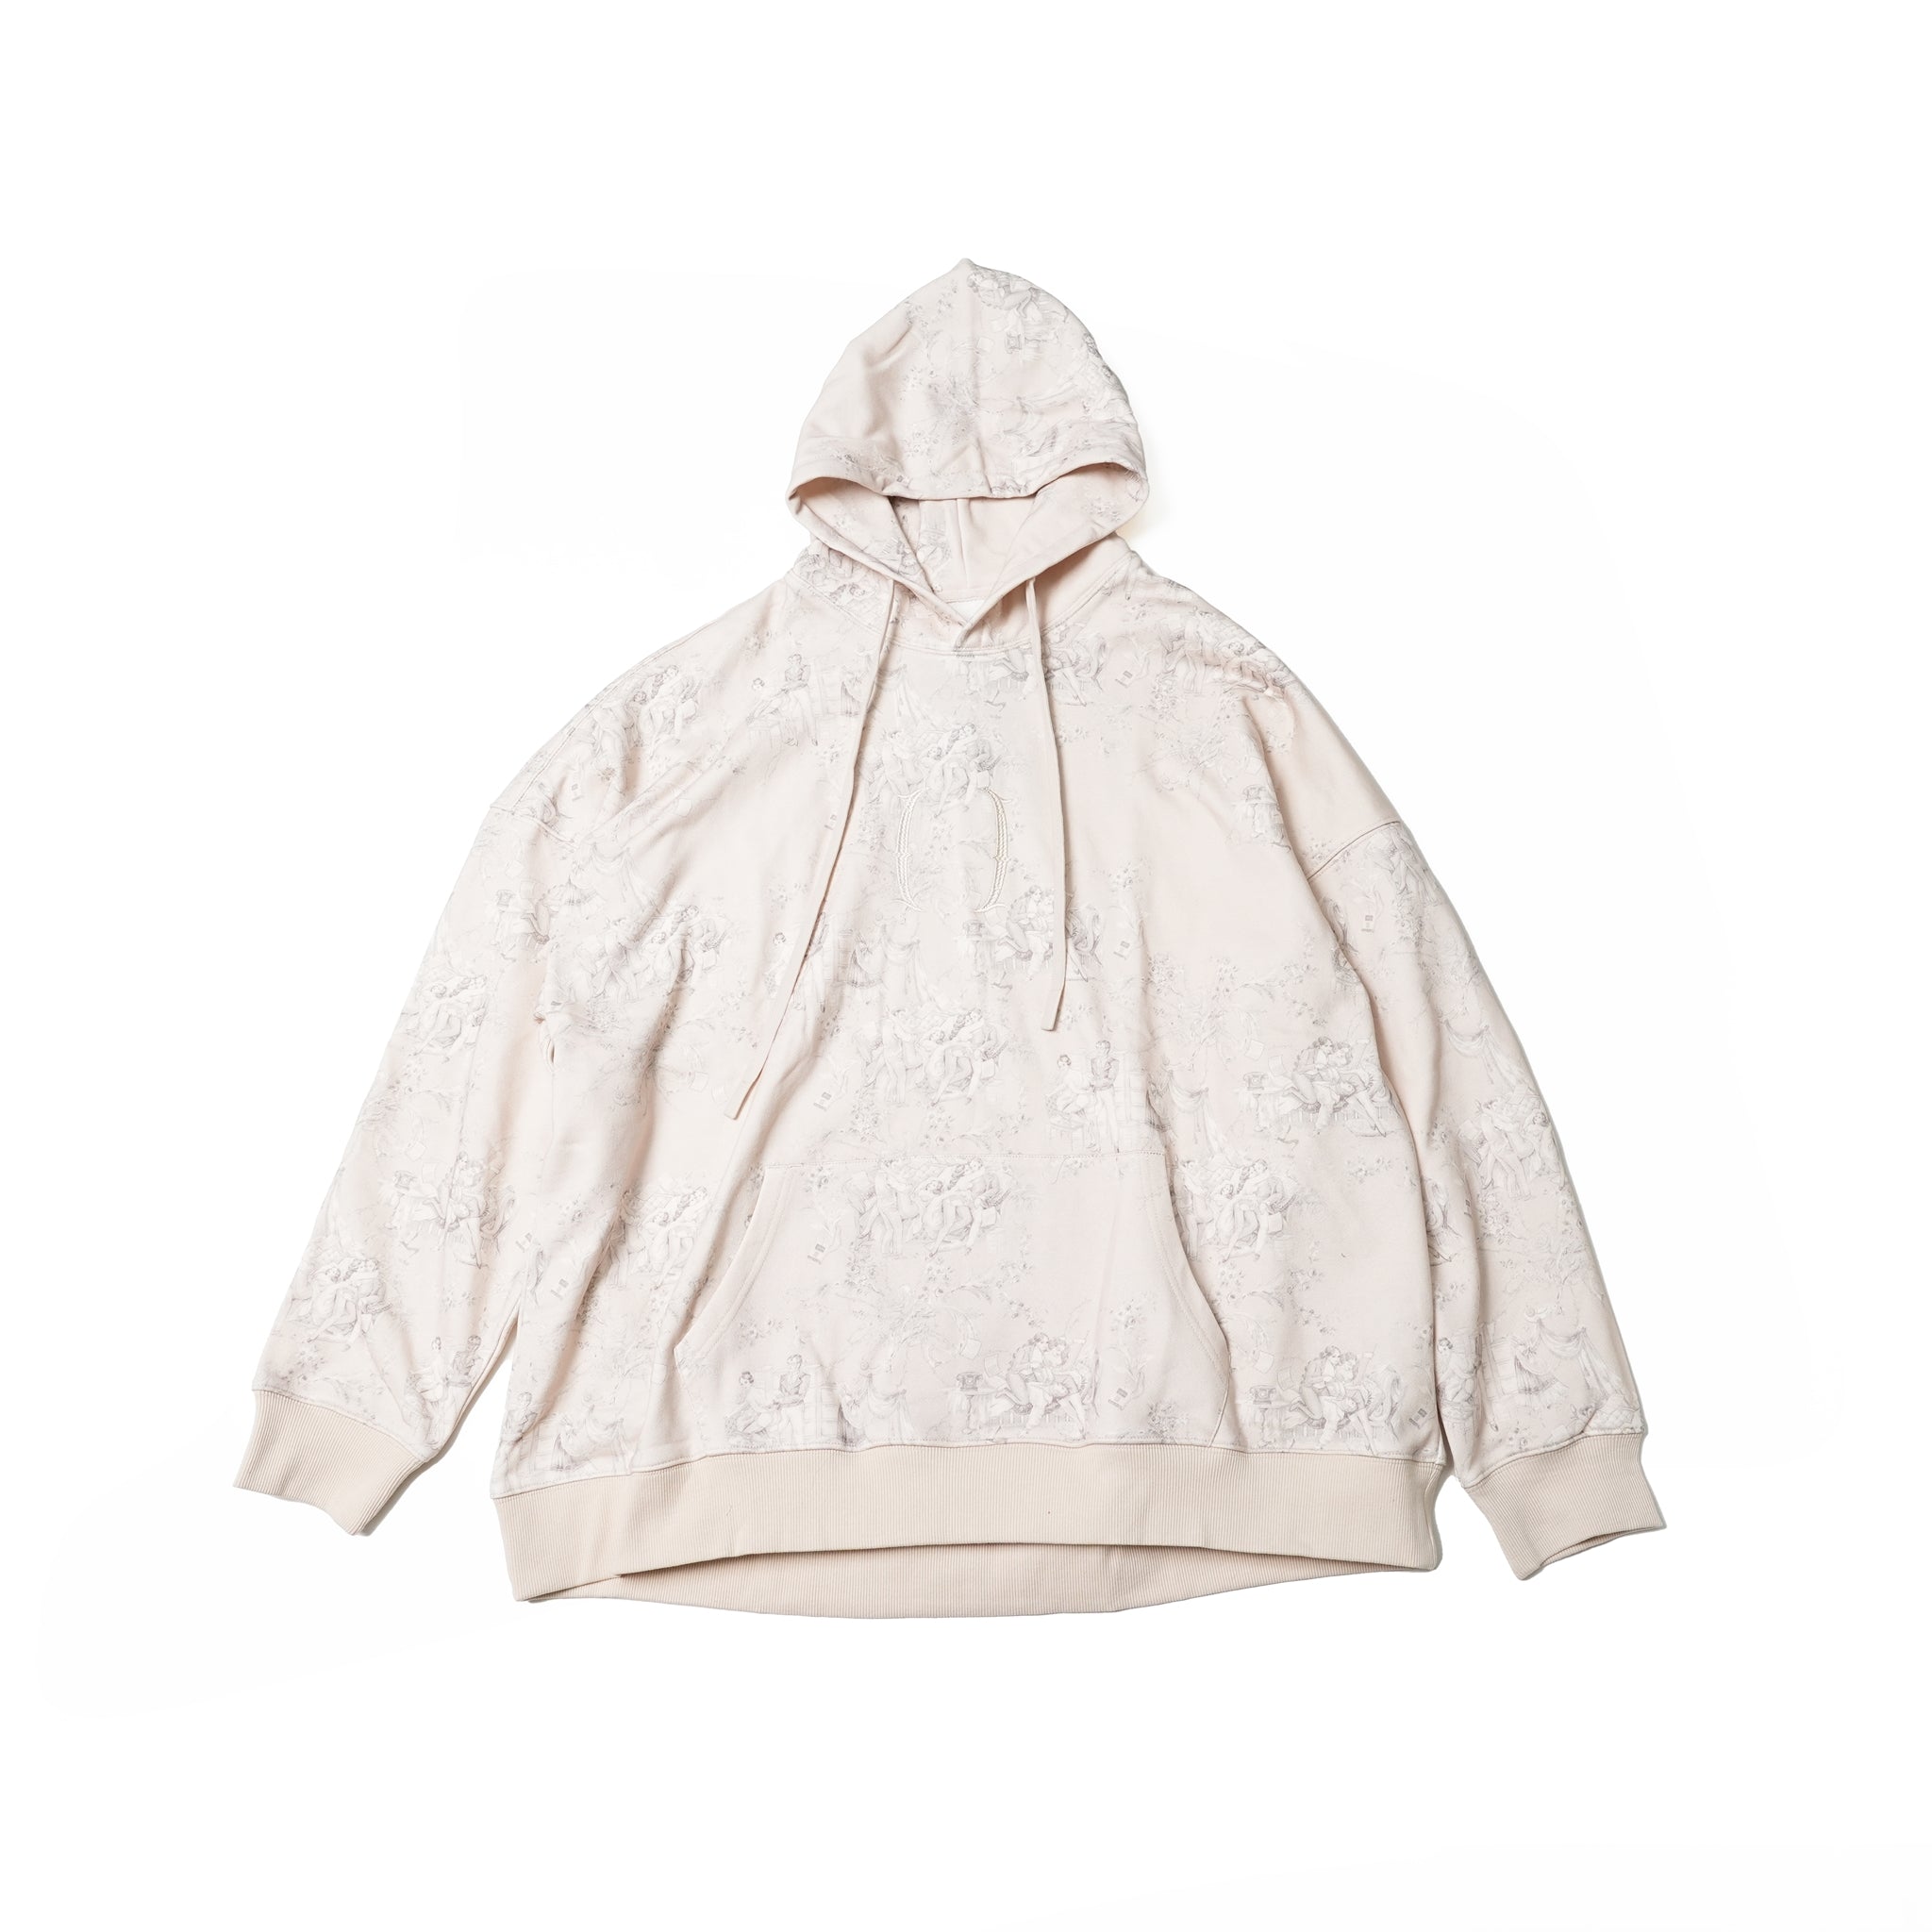 Seivson x (A)crypsis® 2023AW L{ }VER Collection - High-Pound LOVER Vintage Ladies Figure Overlay Embroidered Hooded Top - Letter Meters | Color:White | Size:S/M【(A)CRYPSIS®】【SEIVSON_セイヴソン】